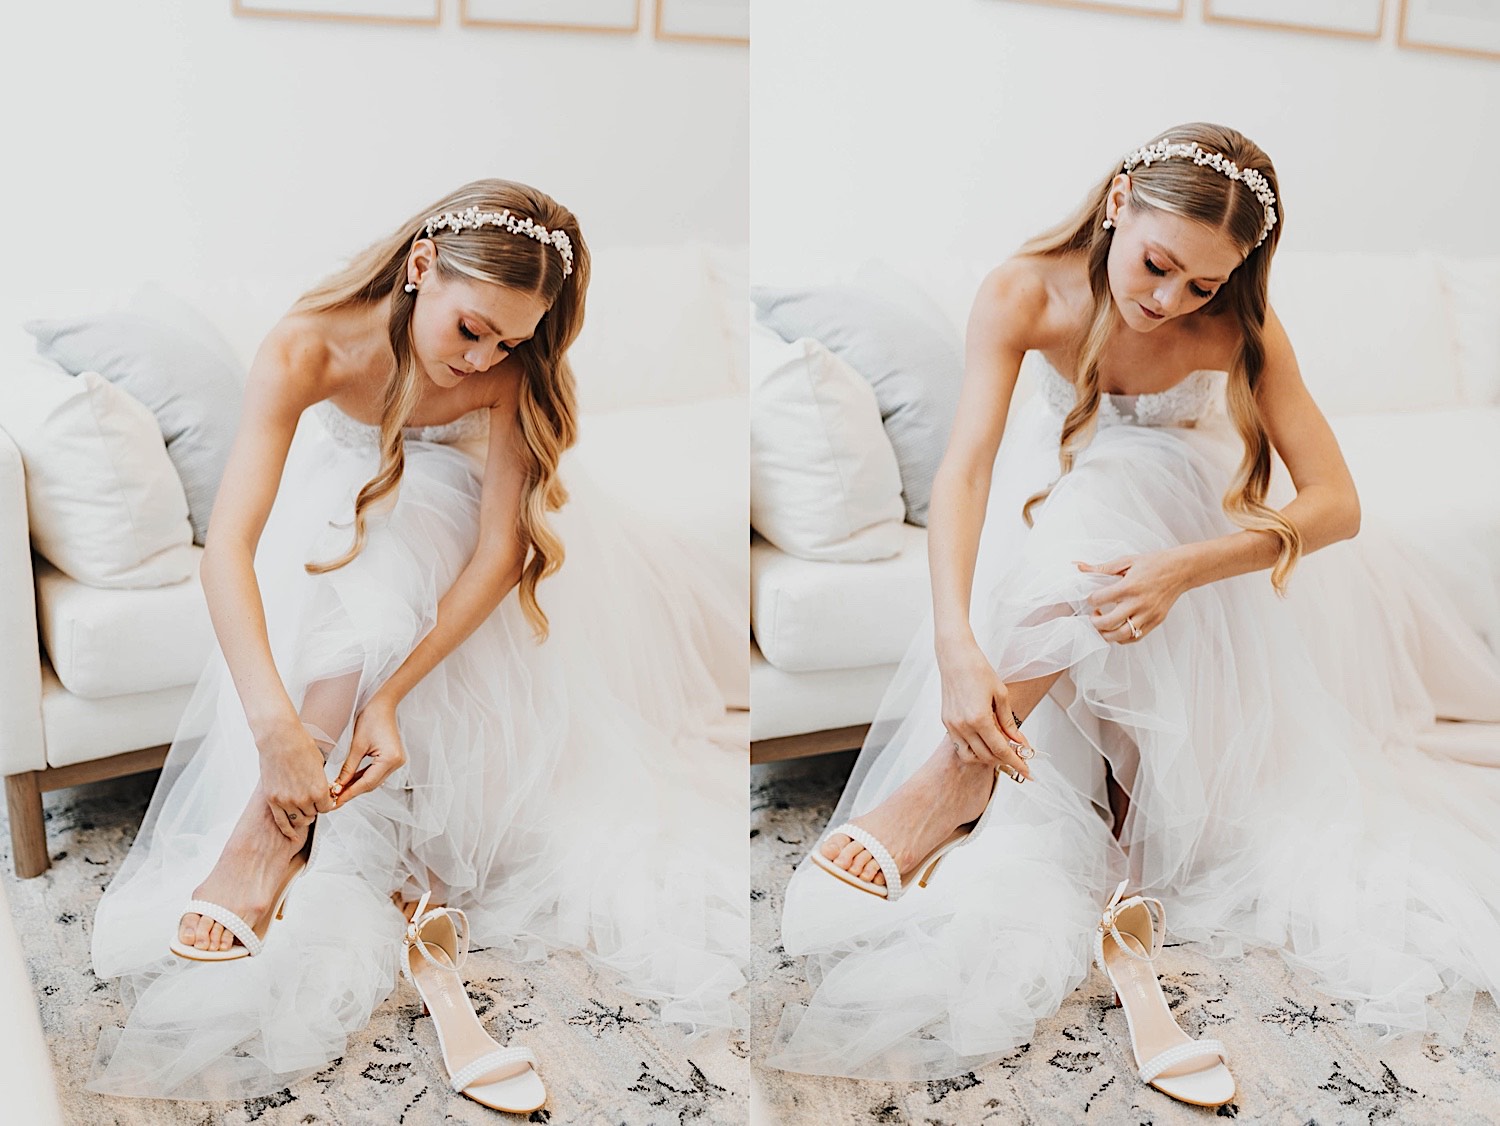 2 photos side by side of a bride sitting on a white couch putting on her shoes for her wedding day